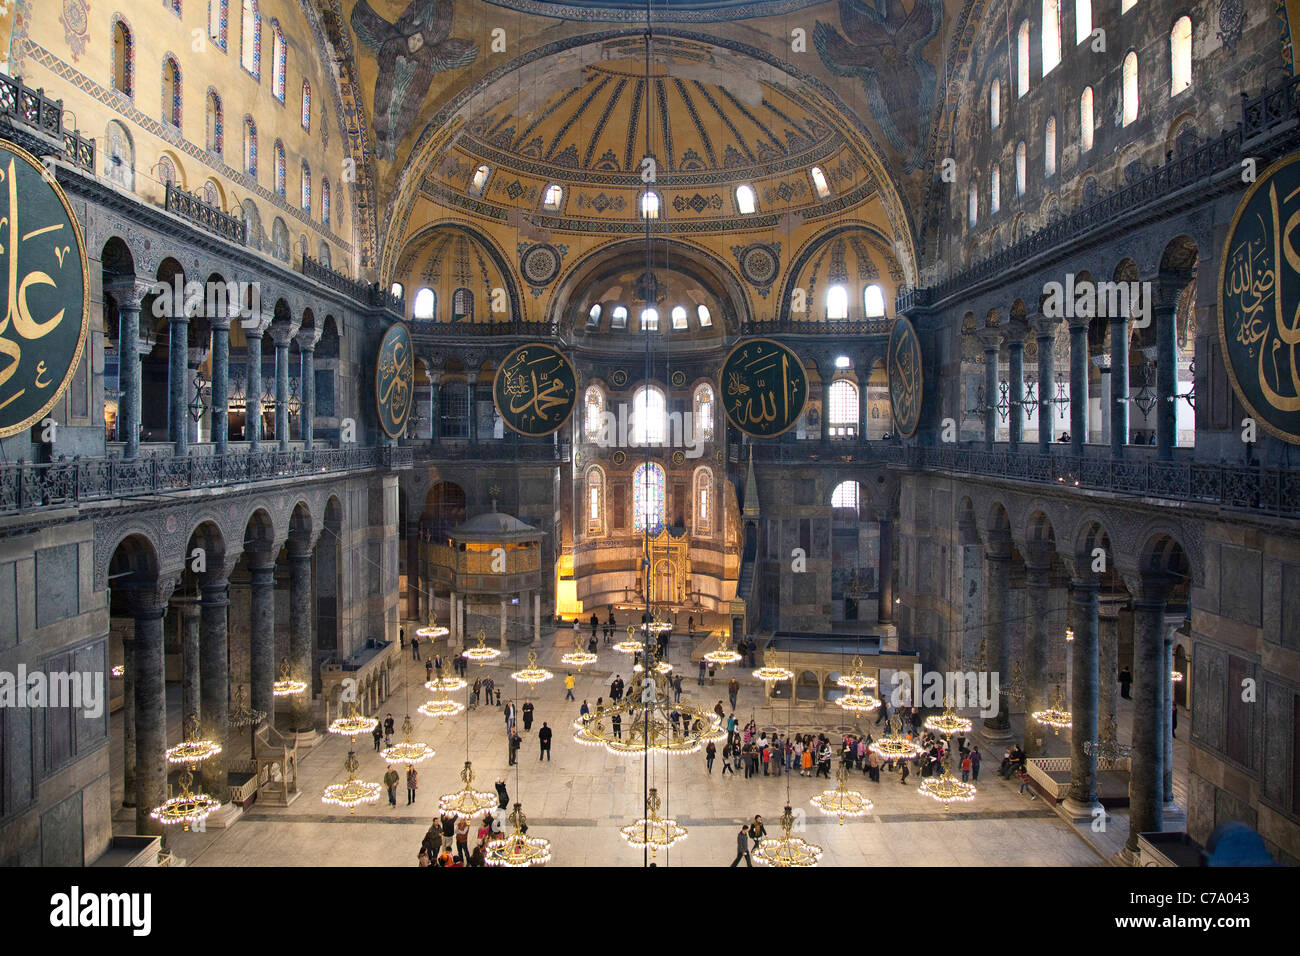 Birdseye View of Nave and Chancel Interior from Upper Level at Hagia Sophia; Istanbul, Turkey Stock Photo